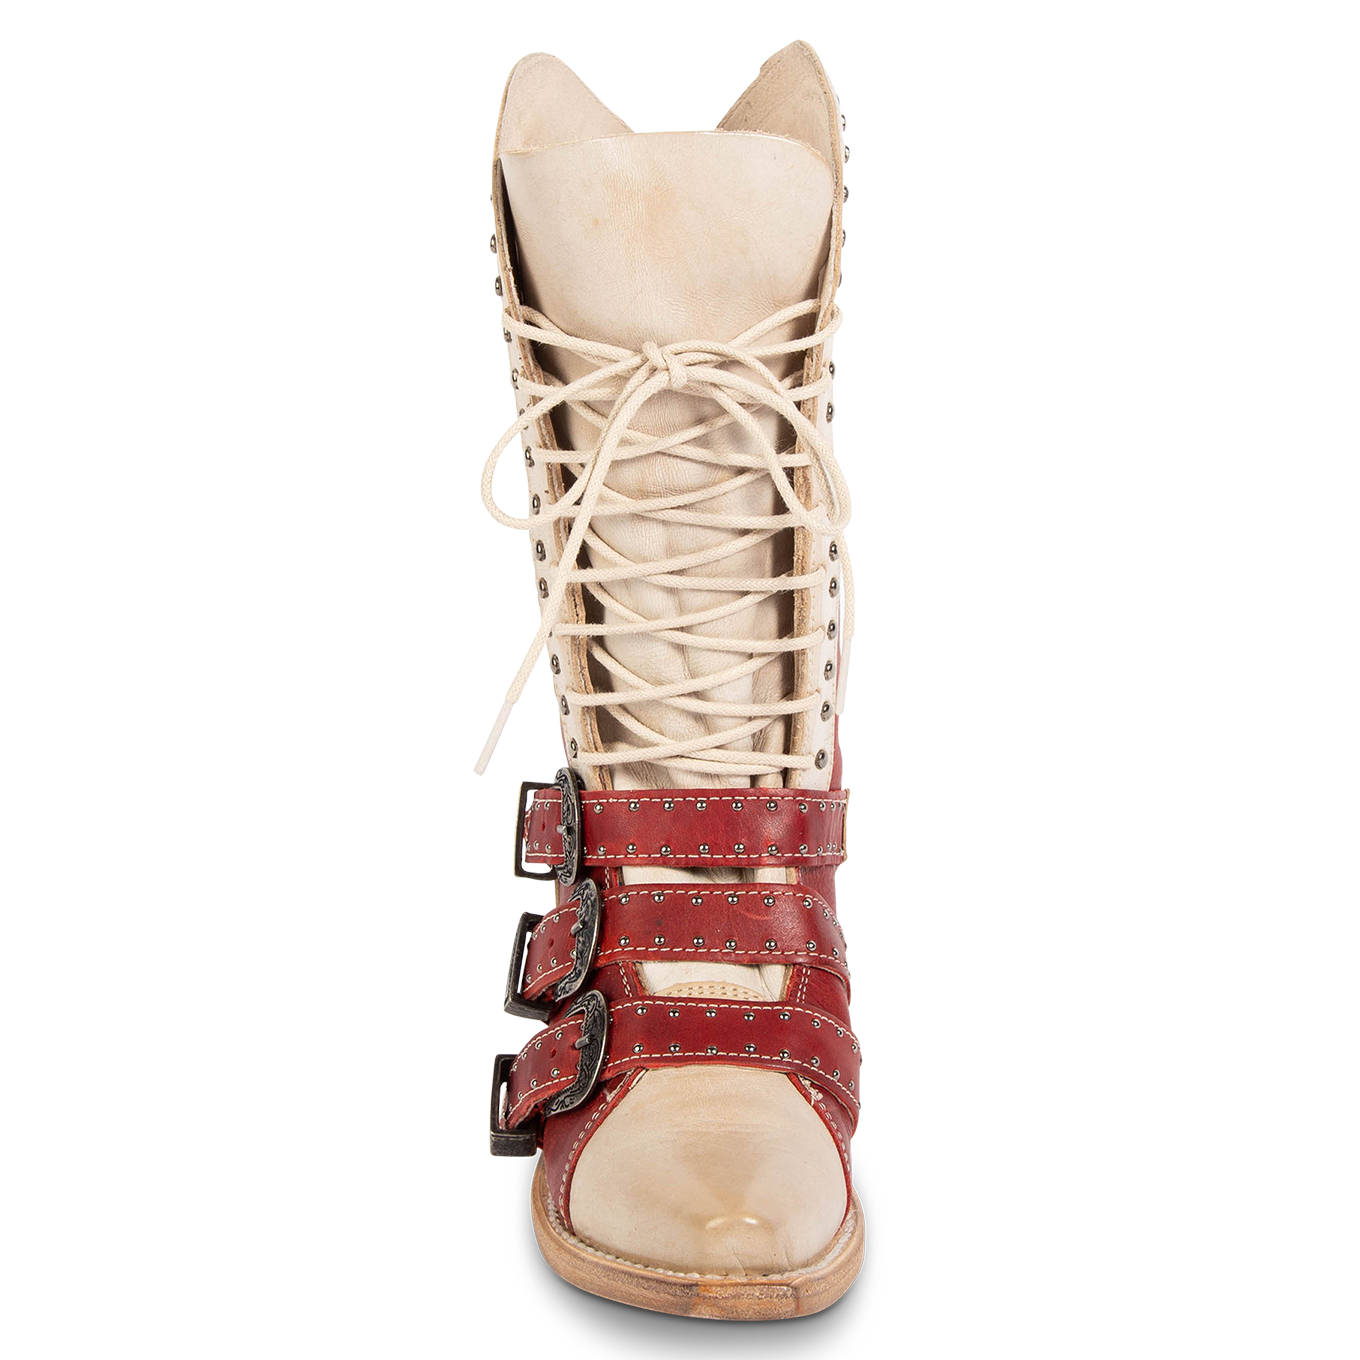 Front view showing lace up shaft, leather accents, and stud detailing on FREEBIRD women's Winnie red multi boot